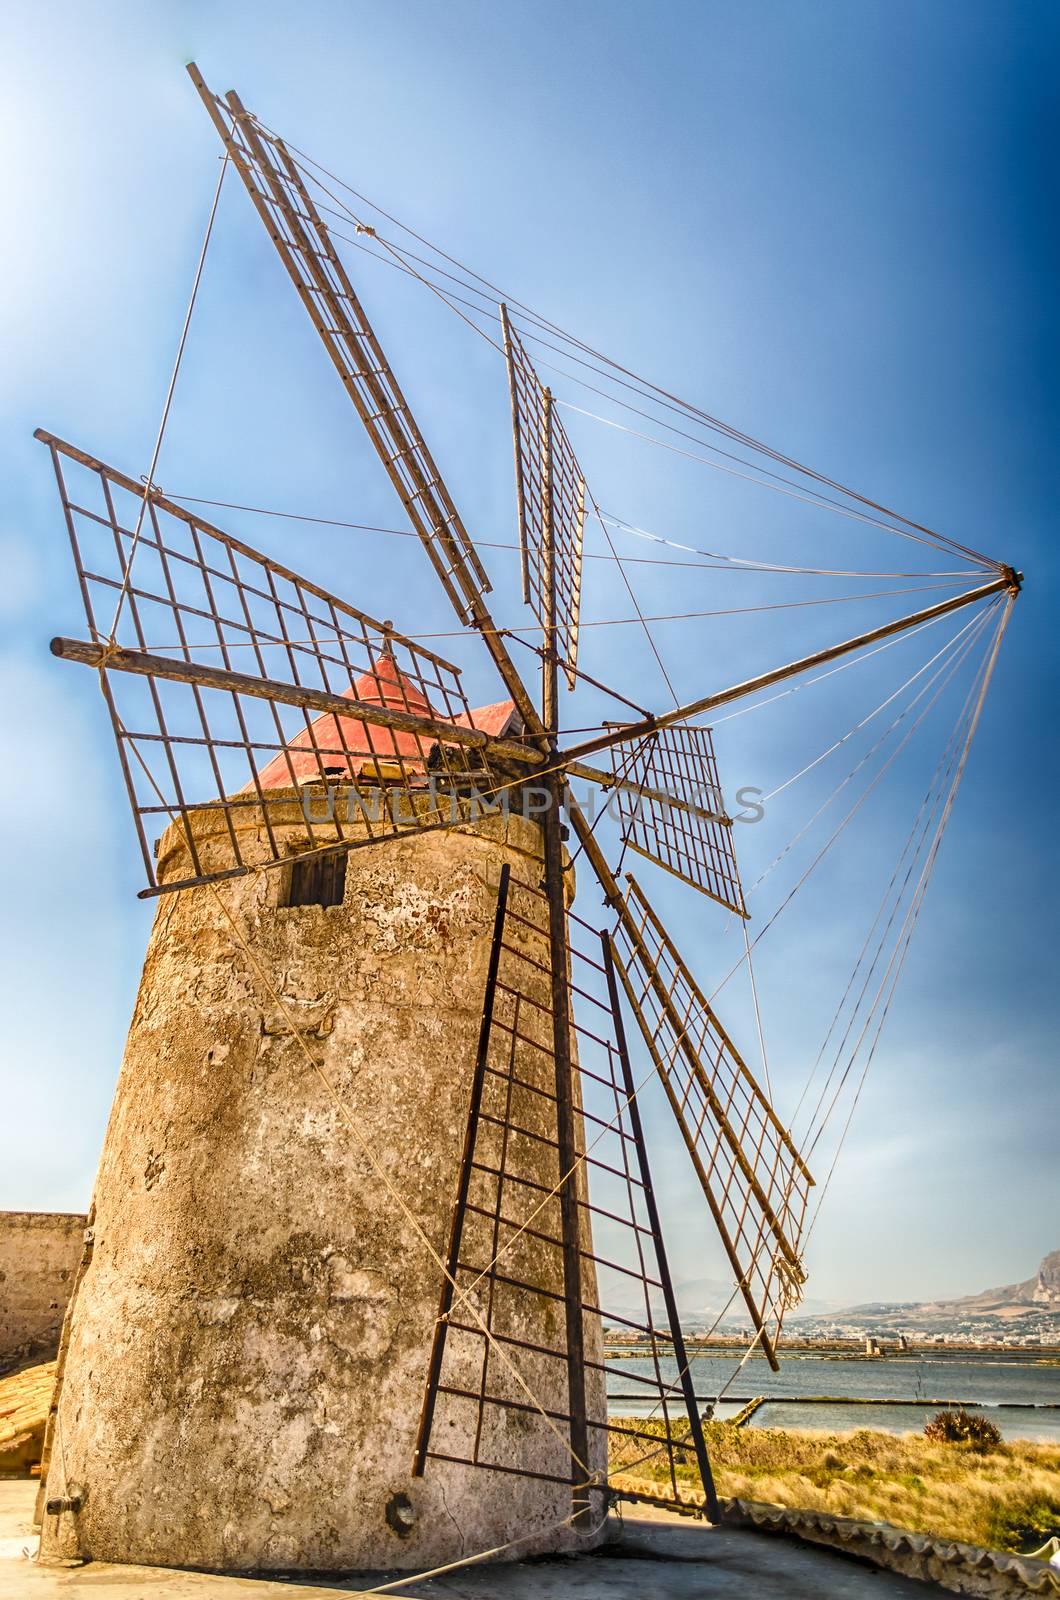 Old windmill for salt production, Sicily, Italy by marcorubino